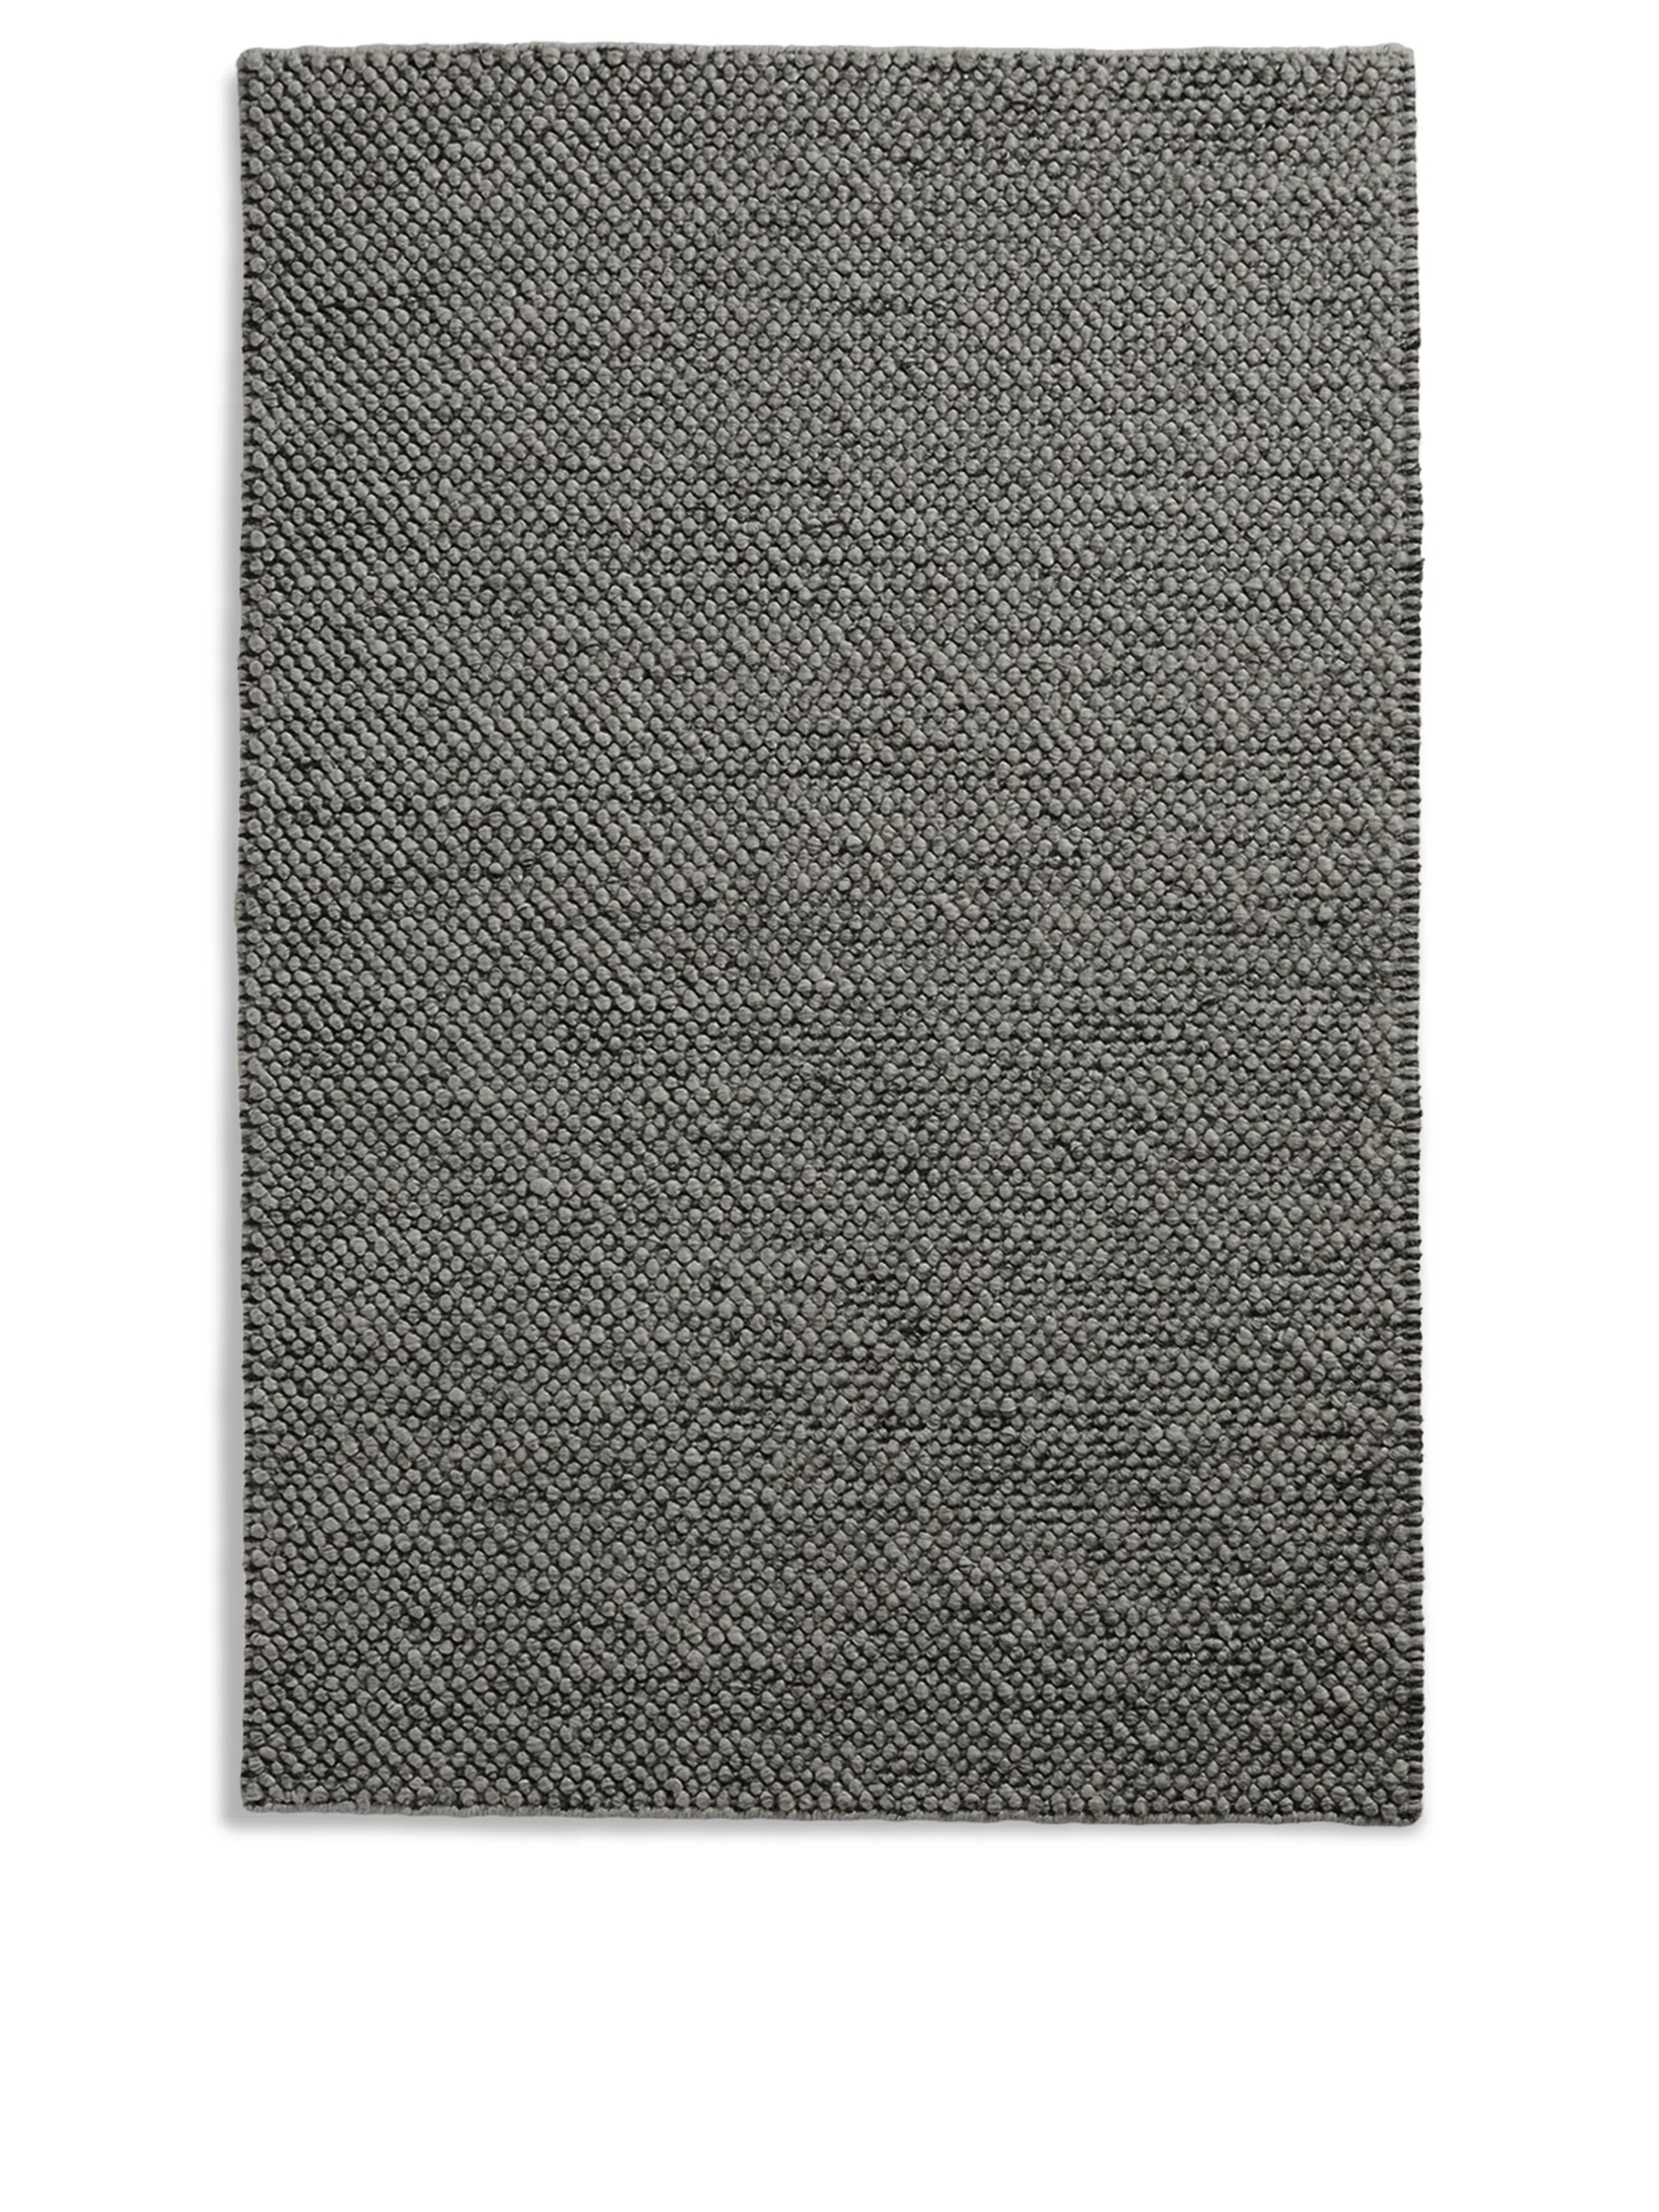 Woud -  - Tact Rug - Anthracite grey